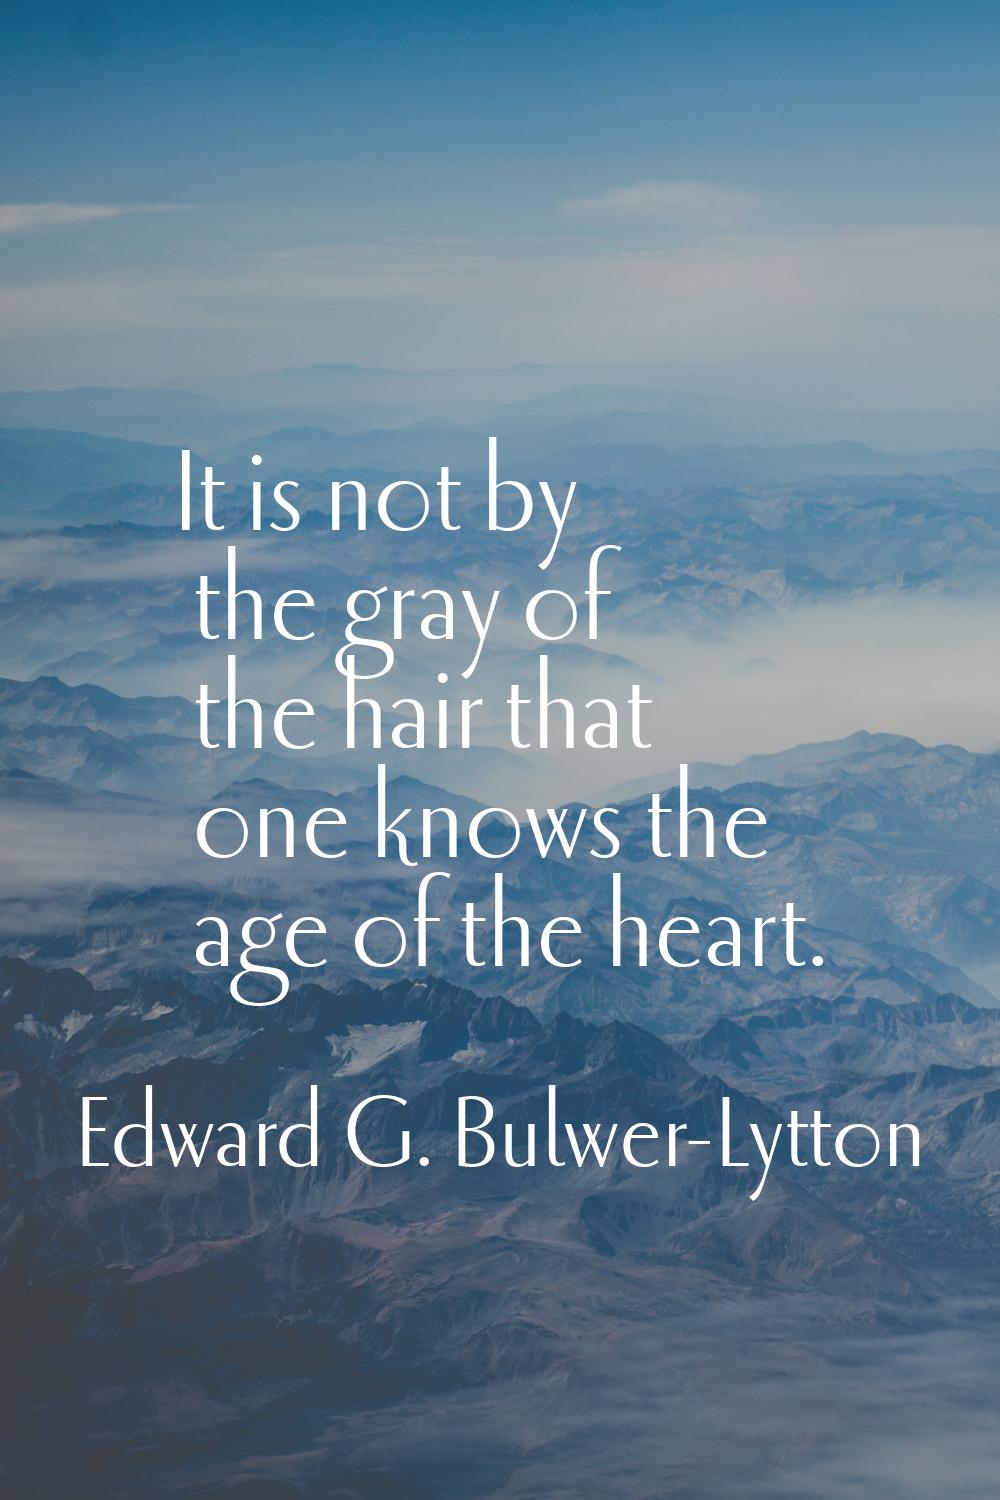 It is not by the gray of the hair that one knows the age of the heart.